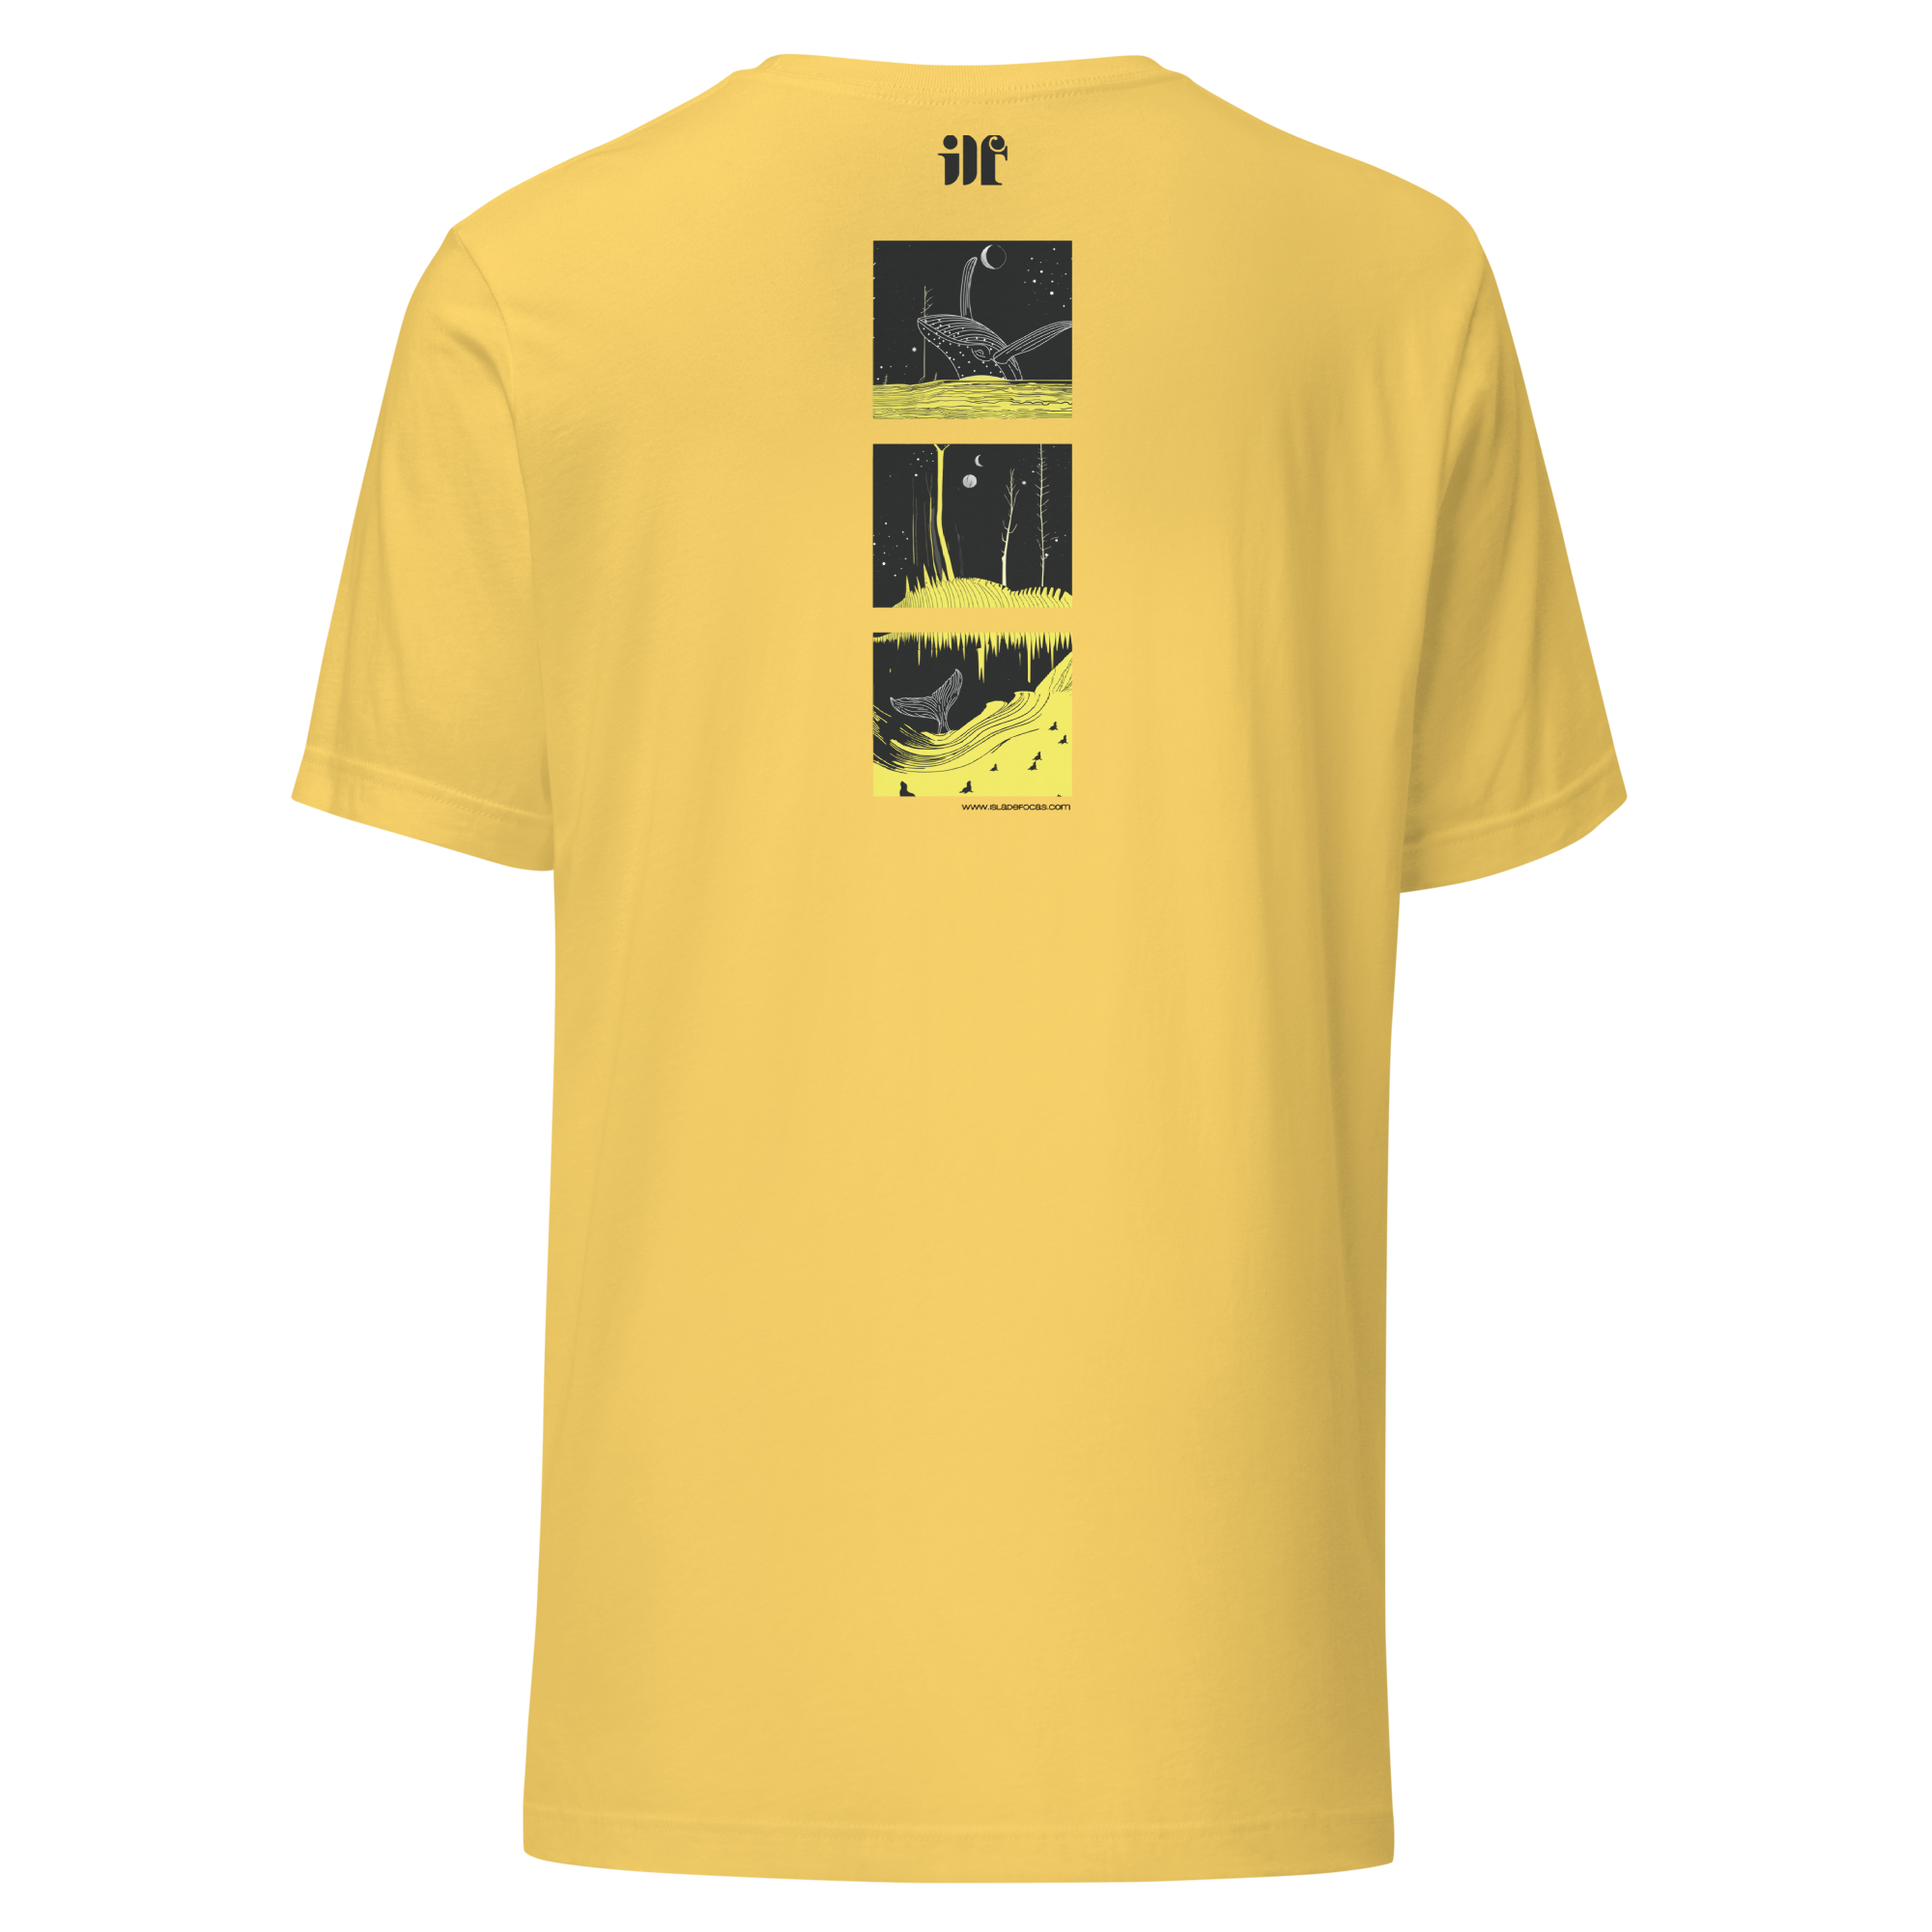 unisex-staple-t-shirt-yellow-back-662a379f4803a.png